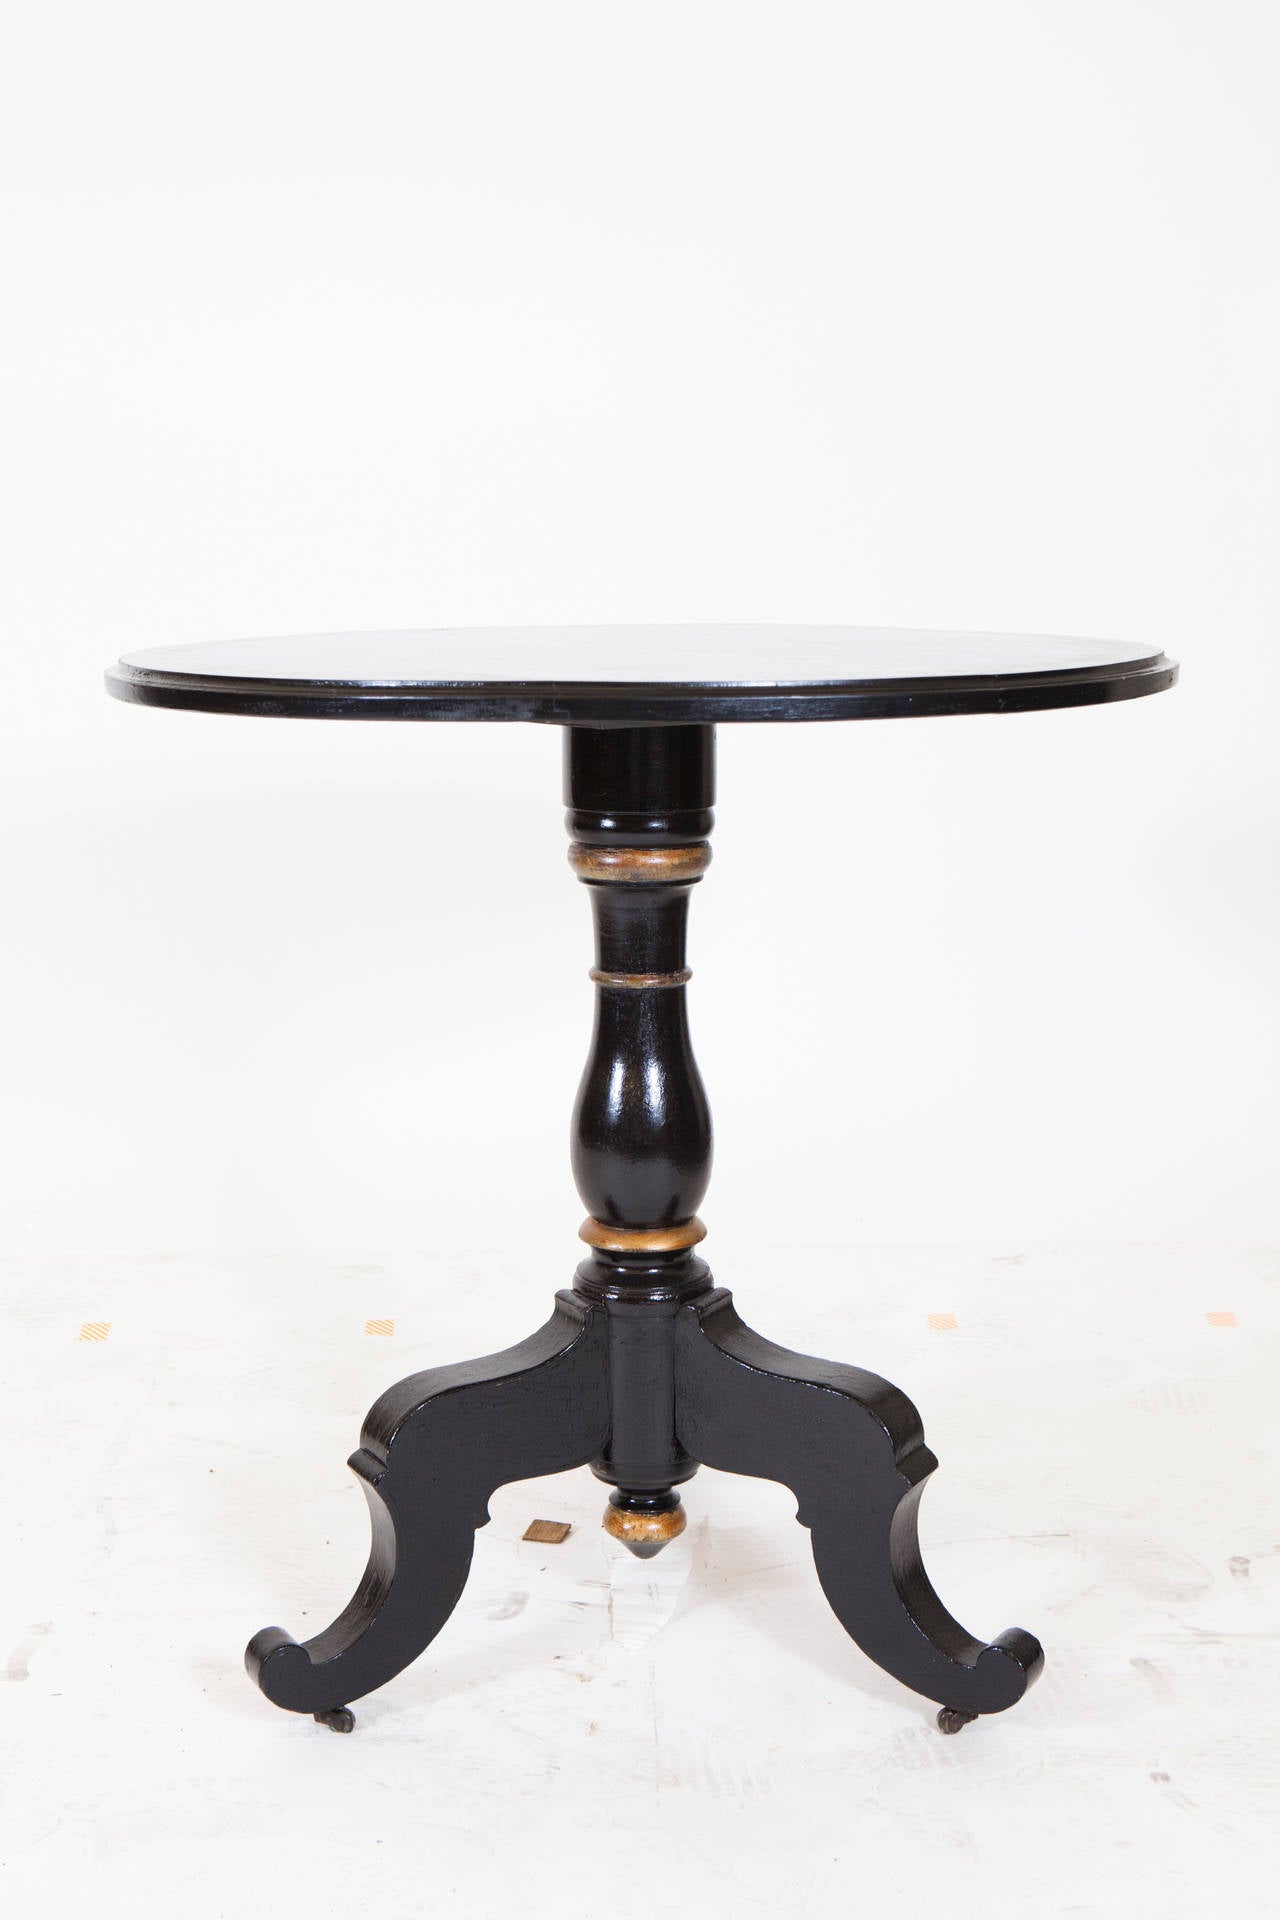 Black painted Guerdon Table with Greek Key Decoration. New Paint and in perfectly beautiful condition. Incredible side table.